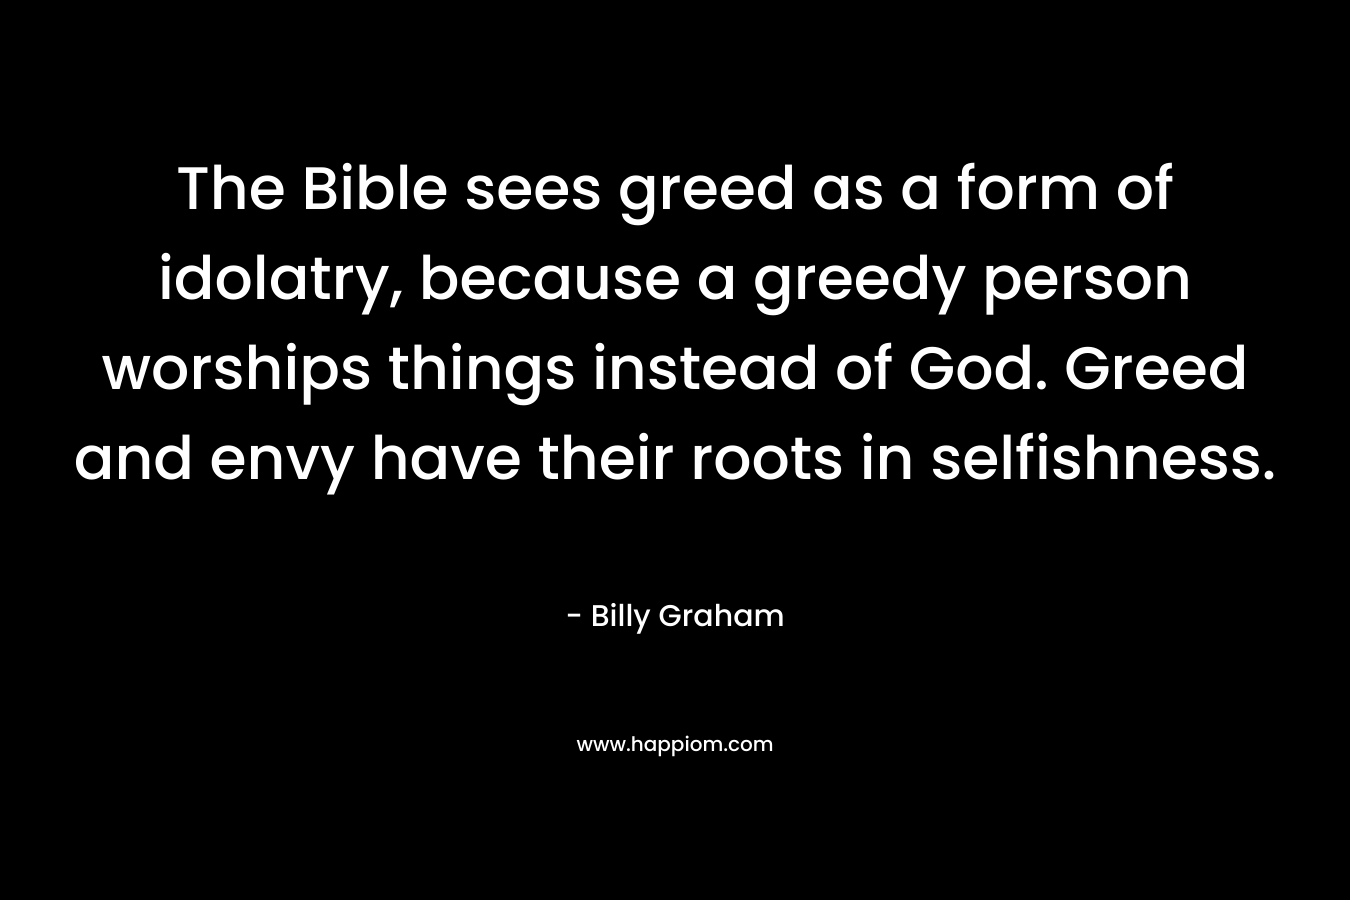 The Bible sees greed as a form of idolatry, because a greedy person worships things instead of God. Greed and envy have their roots in selfishness.